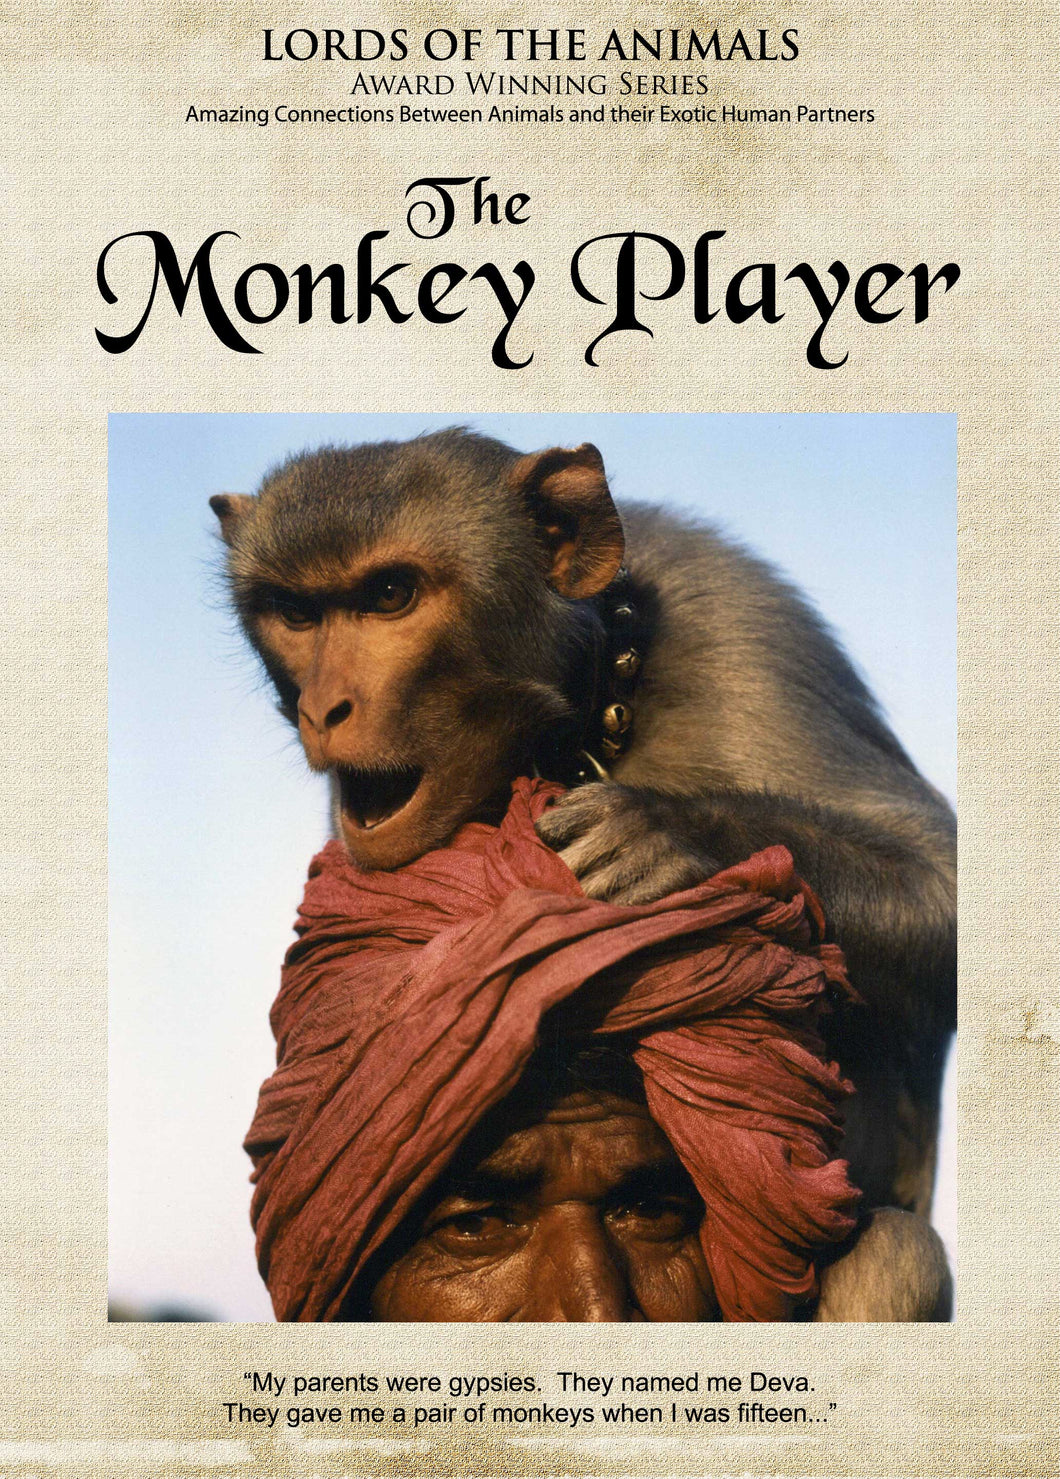 Lords of the Animals: The Monkey Player